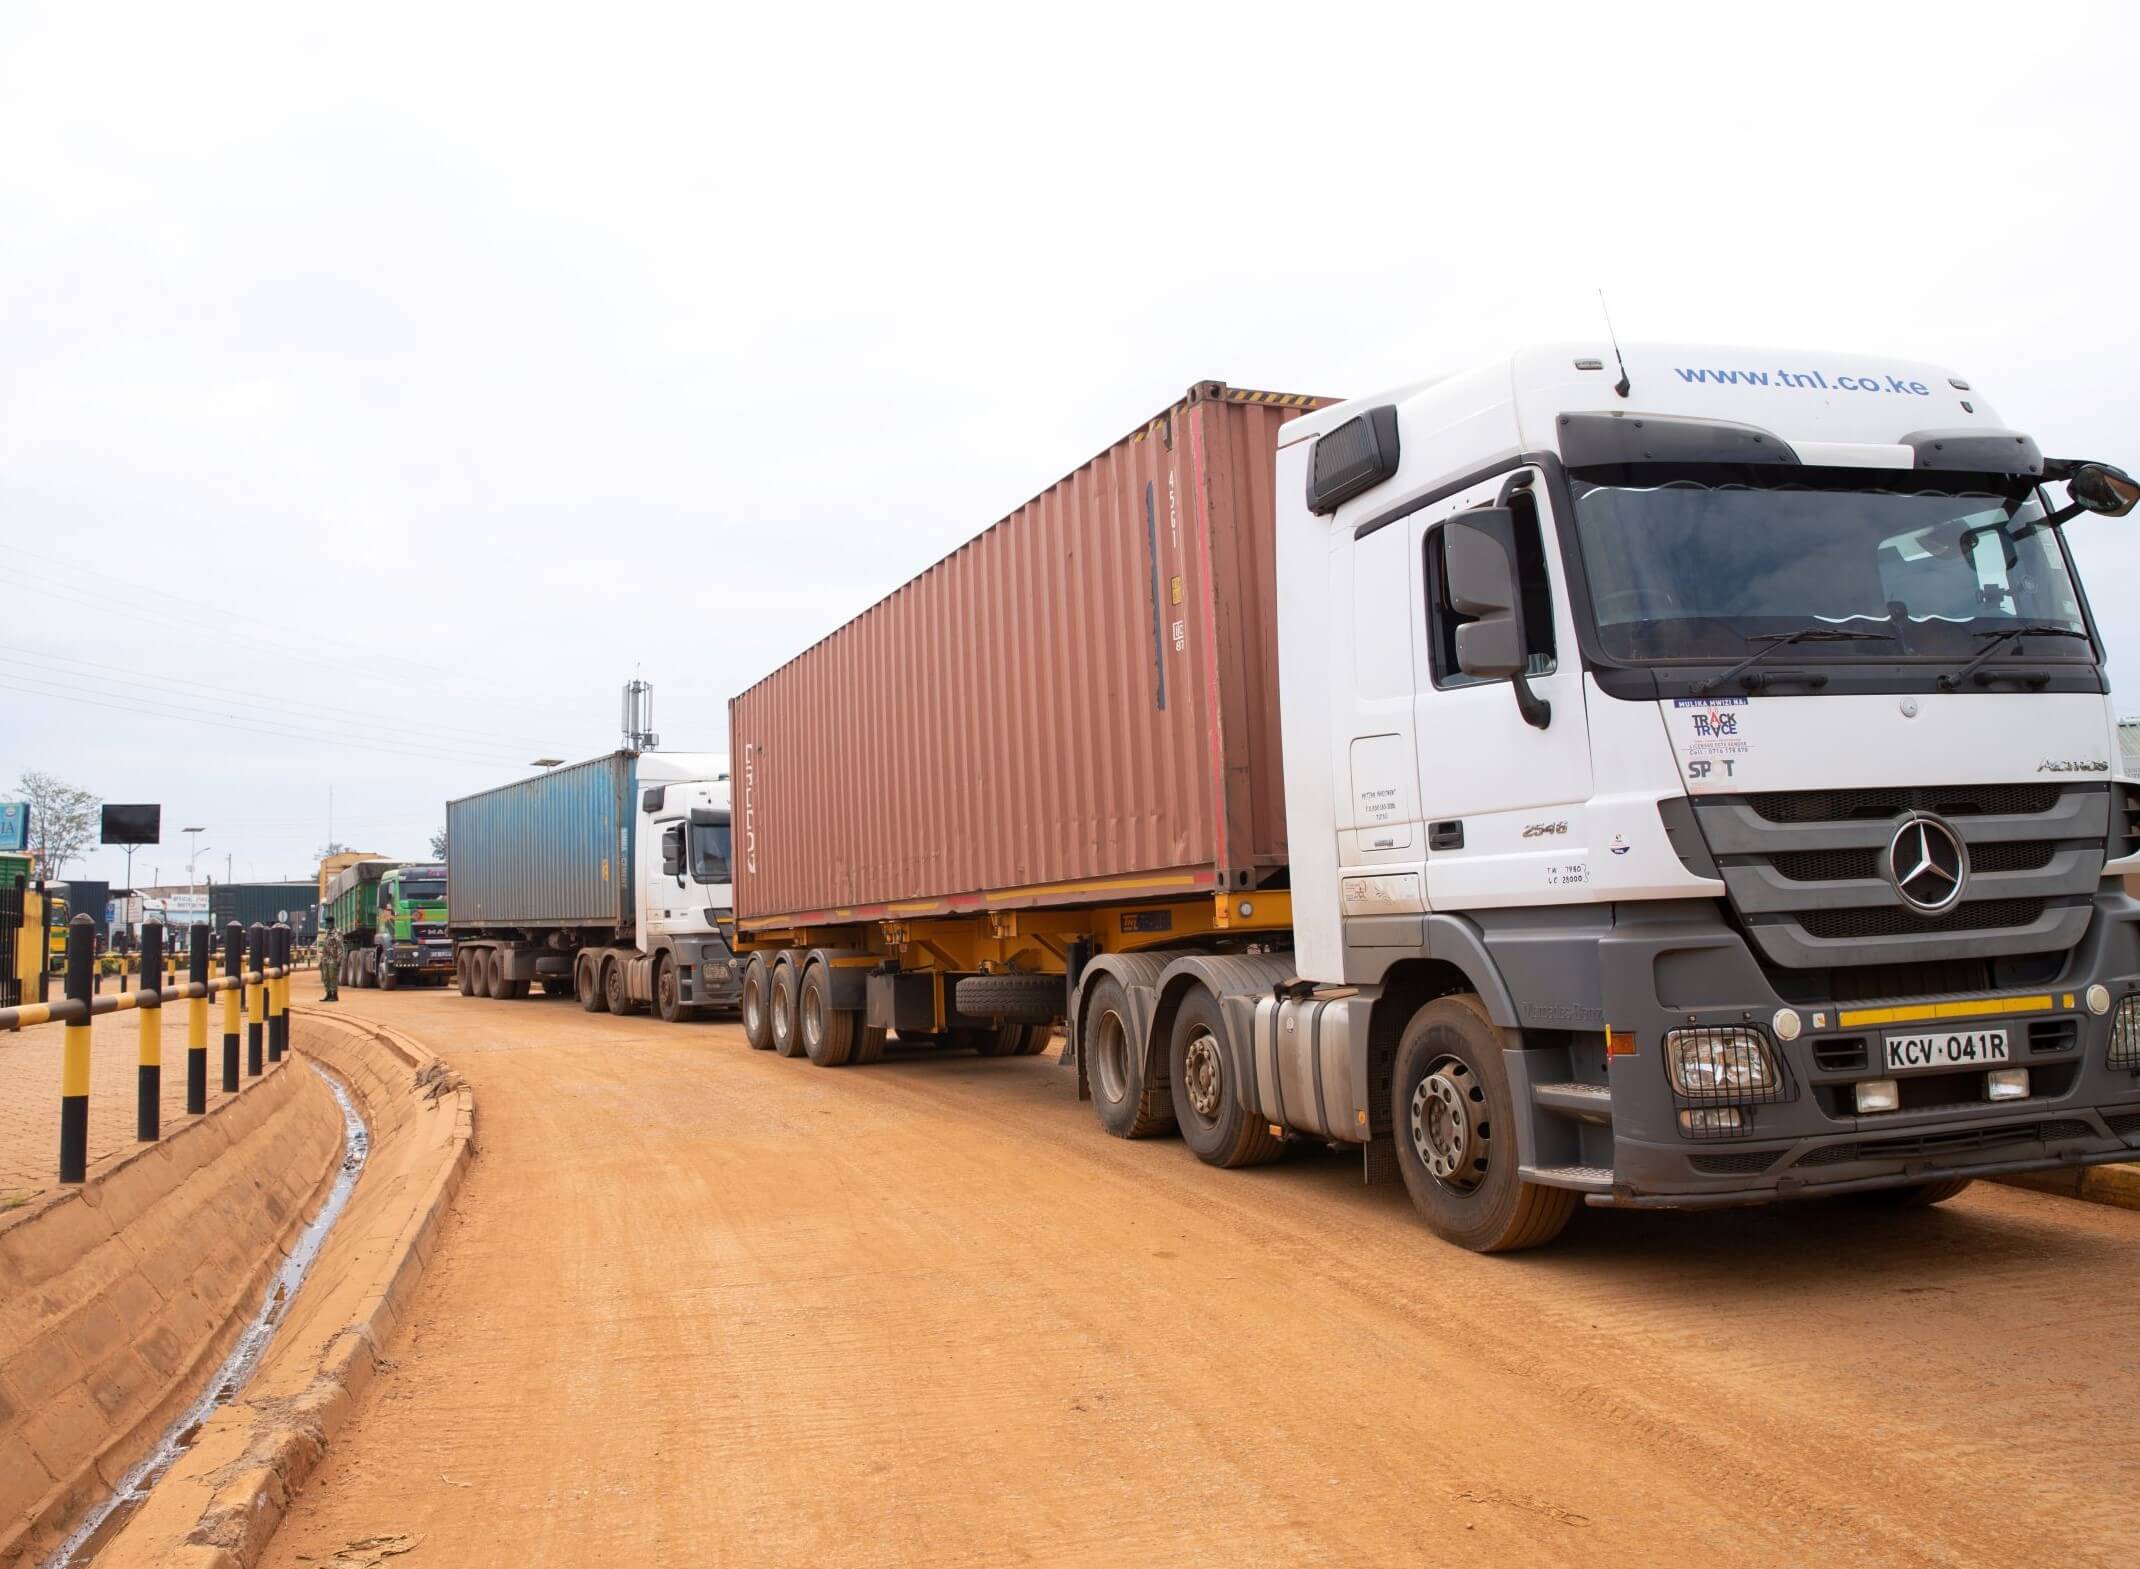 COVID-19 Testing for Truck Drivers Helps Open Trade in IOM-TMEA Partnership